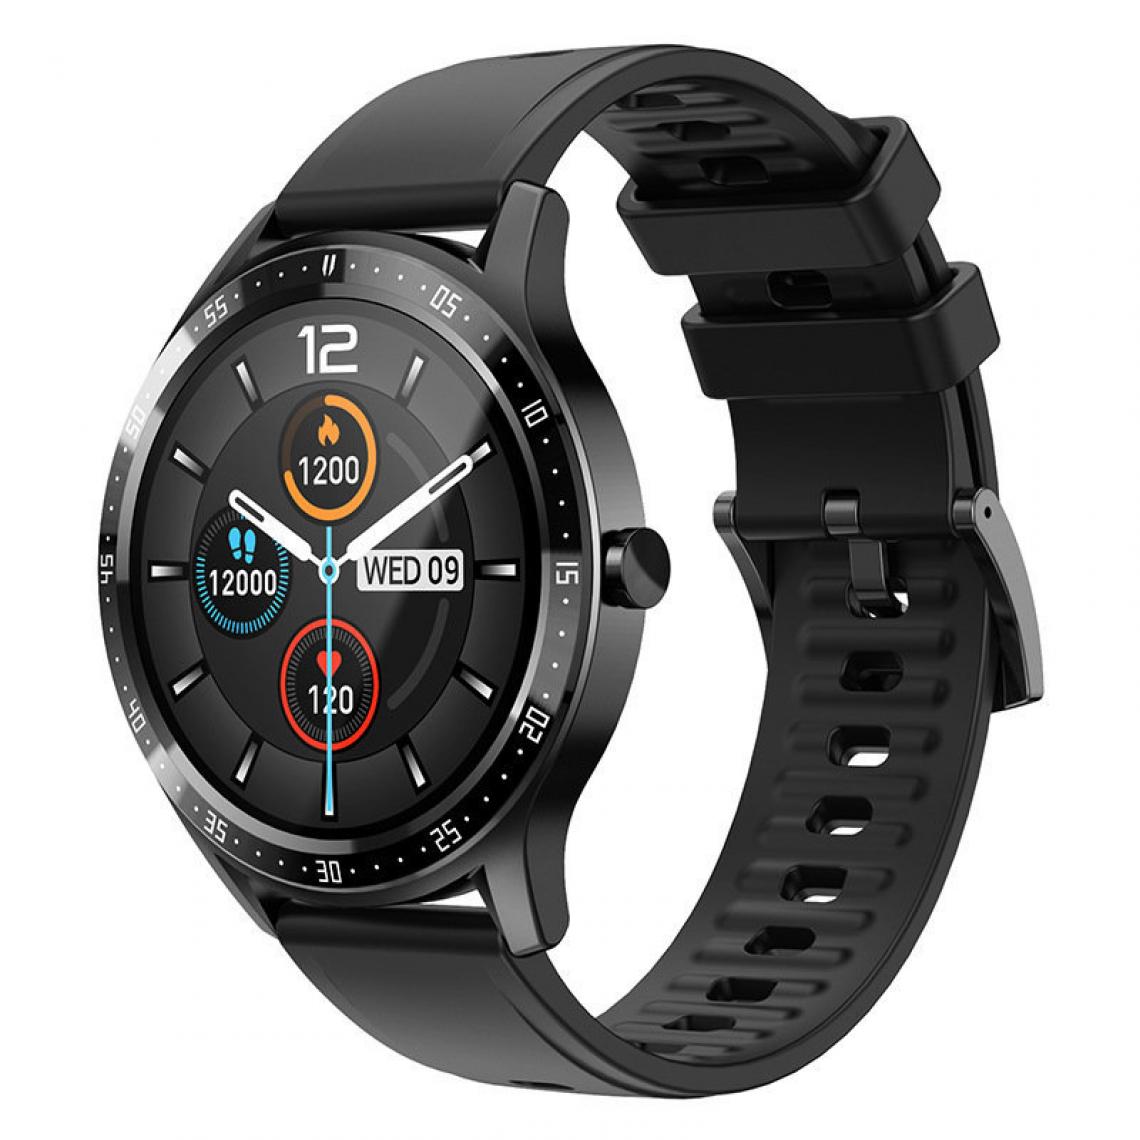 Chronotech Montres - Smart Watch for Men Women, 1.28 inch Touch Fitness Tracker with Heart Rate Monitor, Blood Pressure, Notification, IP67 Waterproof Fitness Watch with 8 Mode Sports, Round Smartwatch for Android iOS(black) - Montre connectée